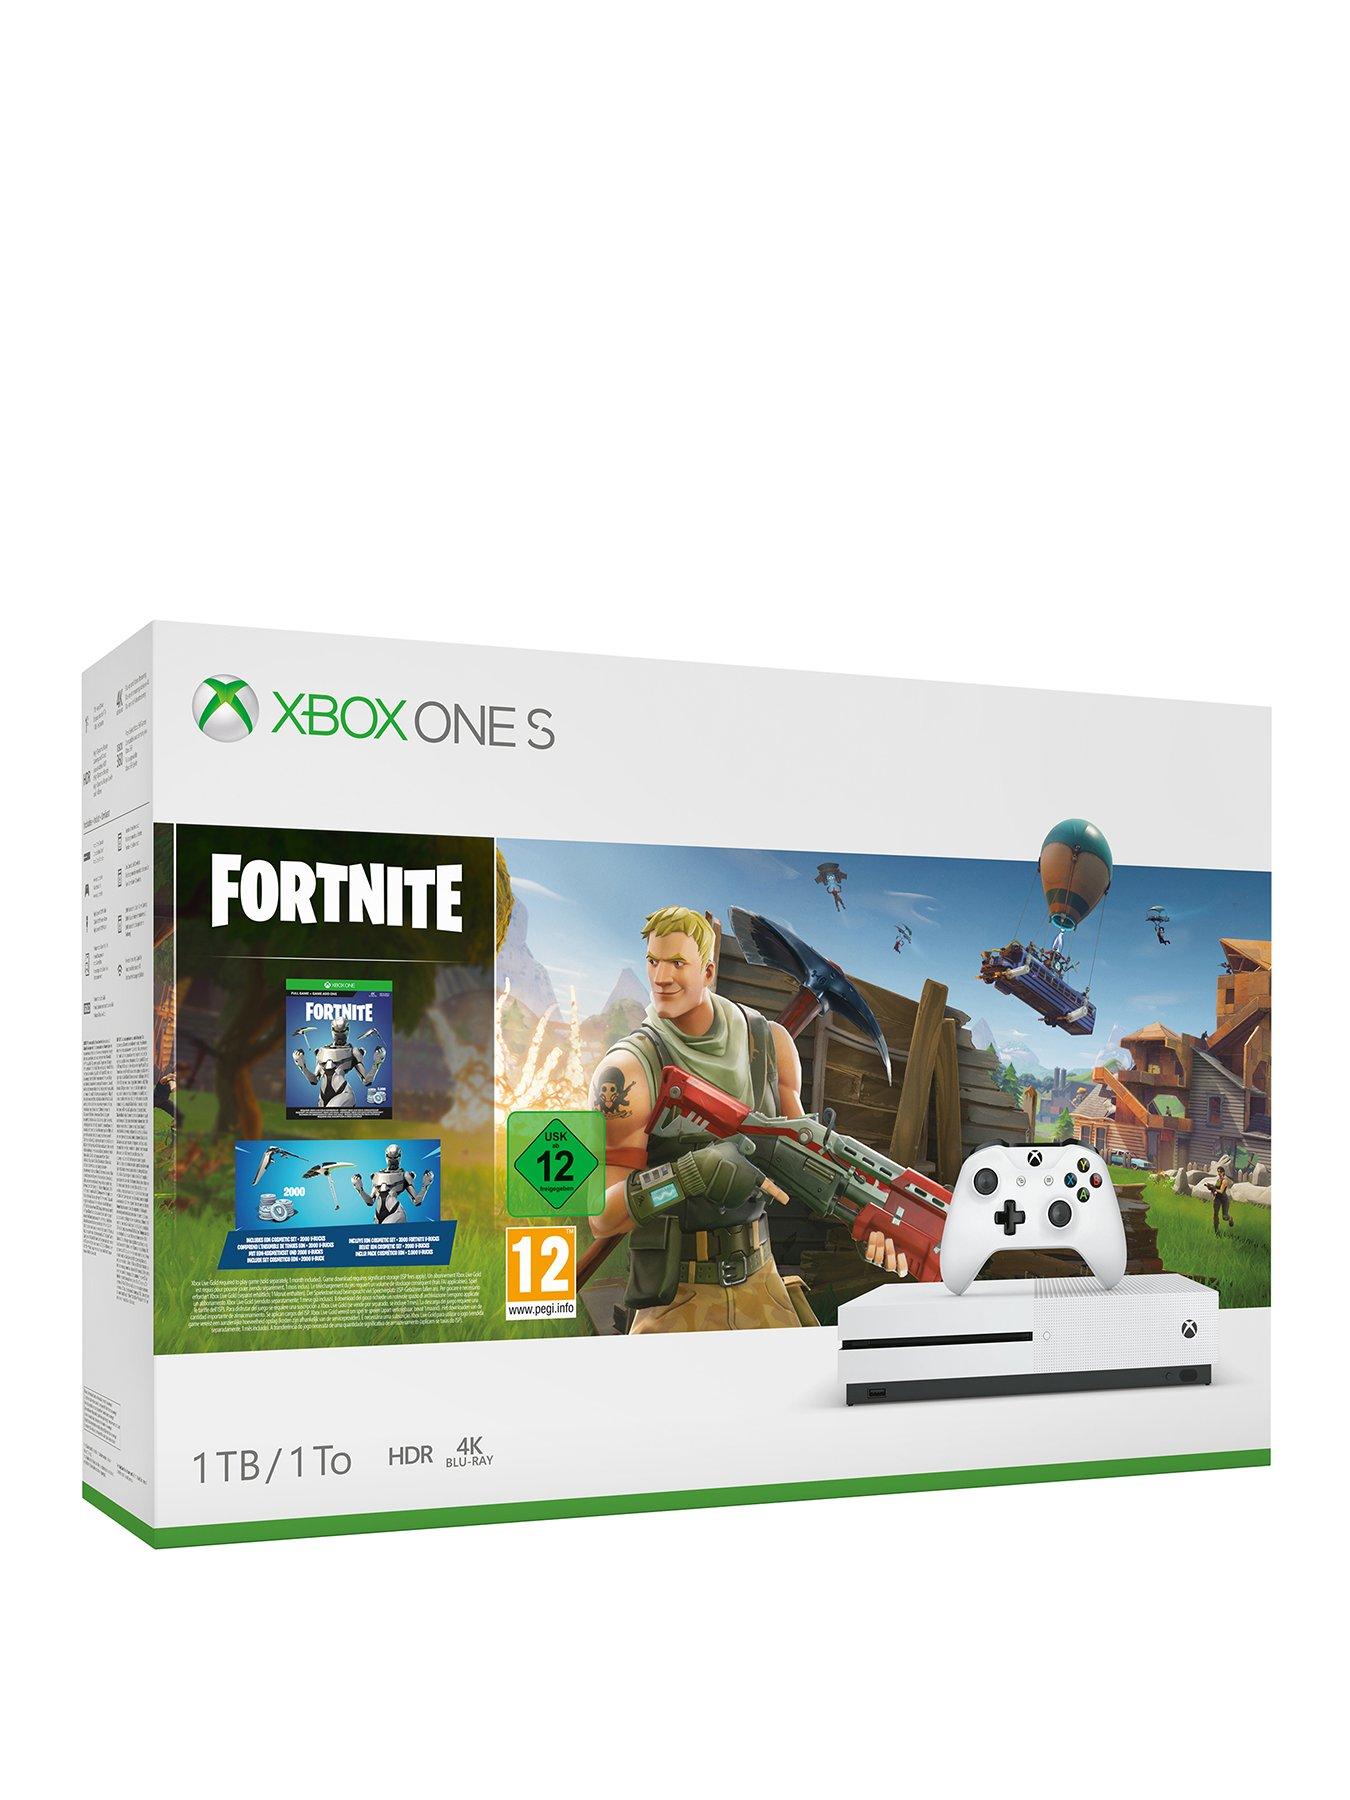 xbox one s fornite 1tb console bundle plus optional extras - fortnite xbox one price uk